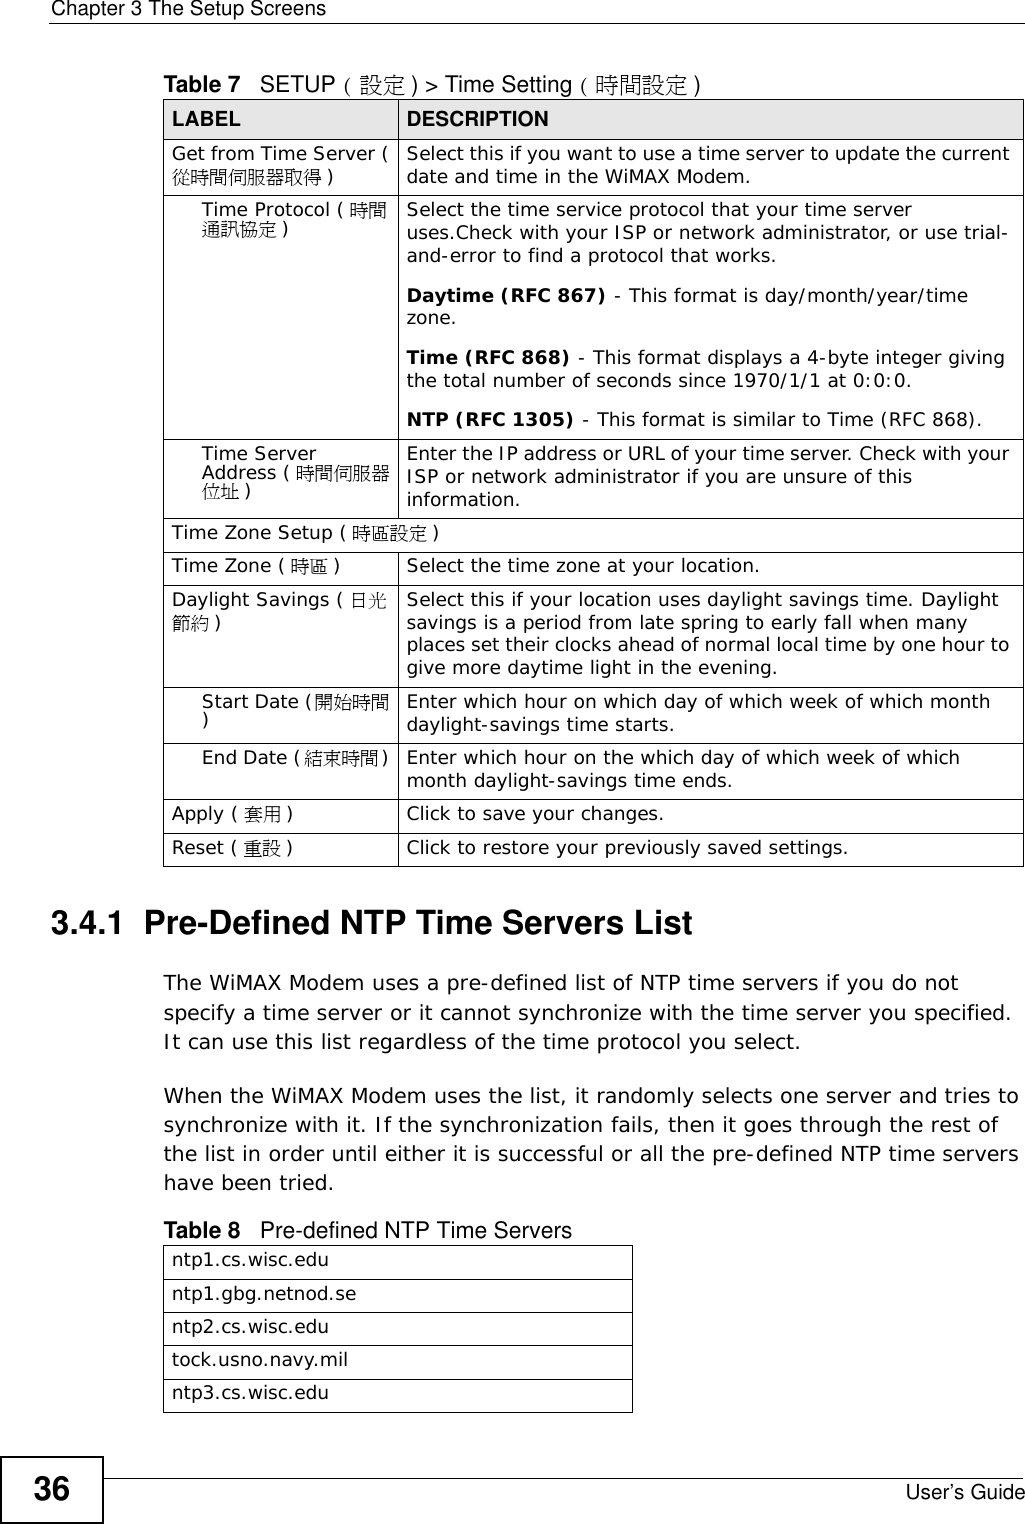 Chapter 3 The Setup ScreensUser’s Guide363.4.1  Pre-Defined NTP Time Servers ListThe WiMAX Modem uses a pre-defined list of NTP time servers if you do not specify a time server or it cannot synchronize with the time server you specified. It can use this list regardless of the time protocol you select.When the WiMAX Modem uses the list, it randomly selects one server and tries to synchronize with it. If the synchronization fails, then it goes through the rest of the list in order until either it is successful or all the pre-defined NTP time servers have been tried. Get from Time Server (從時間伺服器取得 )Select this if you want to use a time server to update the current date and time in the WiMAX Modem.Time Protocol ( 時間通訊協定 )Select the time service protocol that your time server uses.Check with your ISP or network administrator, or use trial-and-error to find a protocol that works.Daytime (RFC 867) - This format is day/month/year/time zone.Time (RFC 868) - This format displays a 4-byte integer giving the total number of seconds since 1970/1/1 at 0:0:0.NTP (RFC 1305) - This format is similar to Time (RFC 868).Time Server Address ( 時間伺服器位址 )Enter the IP address or URL of your time server. Check with your ISP or network administrator if you are unsure of this information.Time Zone Setup ( 時區設定 )Time Zone ( 時區 ) Select the time zone at your location.Daylight Savings ( 日光節約 )Select this if your location uses daylight savings time. Daylight savings is a period from late spring to early fall when many places set their clocks ahead of normal local time by one hour to give more daytime light in the evening.Start Date (開始時間)Enter which hour on which day of which week of which month daylight-savings time starts.End Date (結束時間) Enter which hour on the which day of which week of which month daylight-savings time ends.Apply ( 套用 )Click to save your changes.Reset ( 重設 )Click to restore your previously saved settings.Table 7   SETUP (設定) &gt; Time Setting ( 時間設定 )LABEL DESCRIPTIONTable 8   Pre-defined NTP Time Serversntp1.cs.wisc.eduntp1.gbg.netnod.sentp2.cs.wisc.edutock.usno.navy.milntp3.cs.wisc.edu